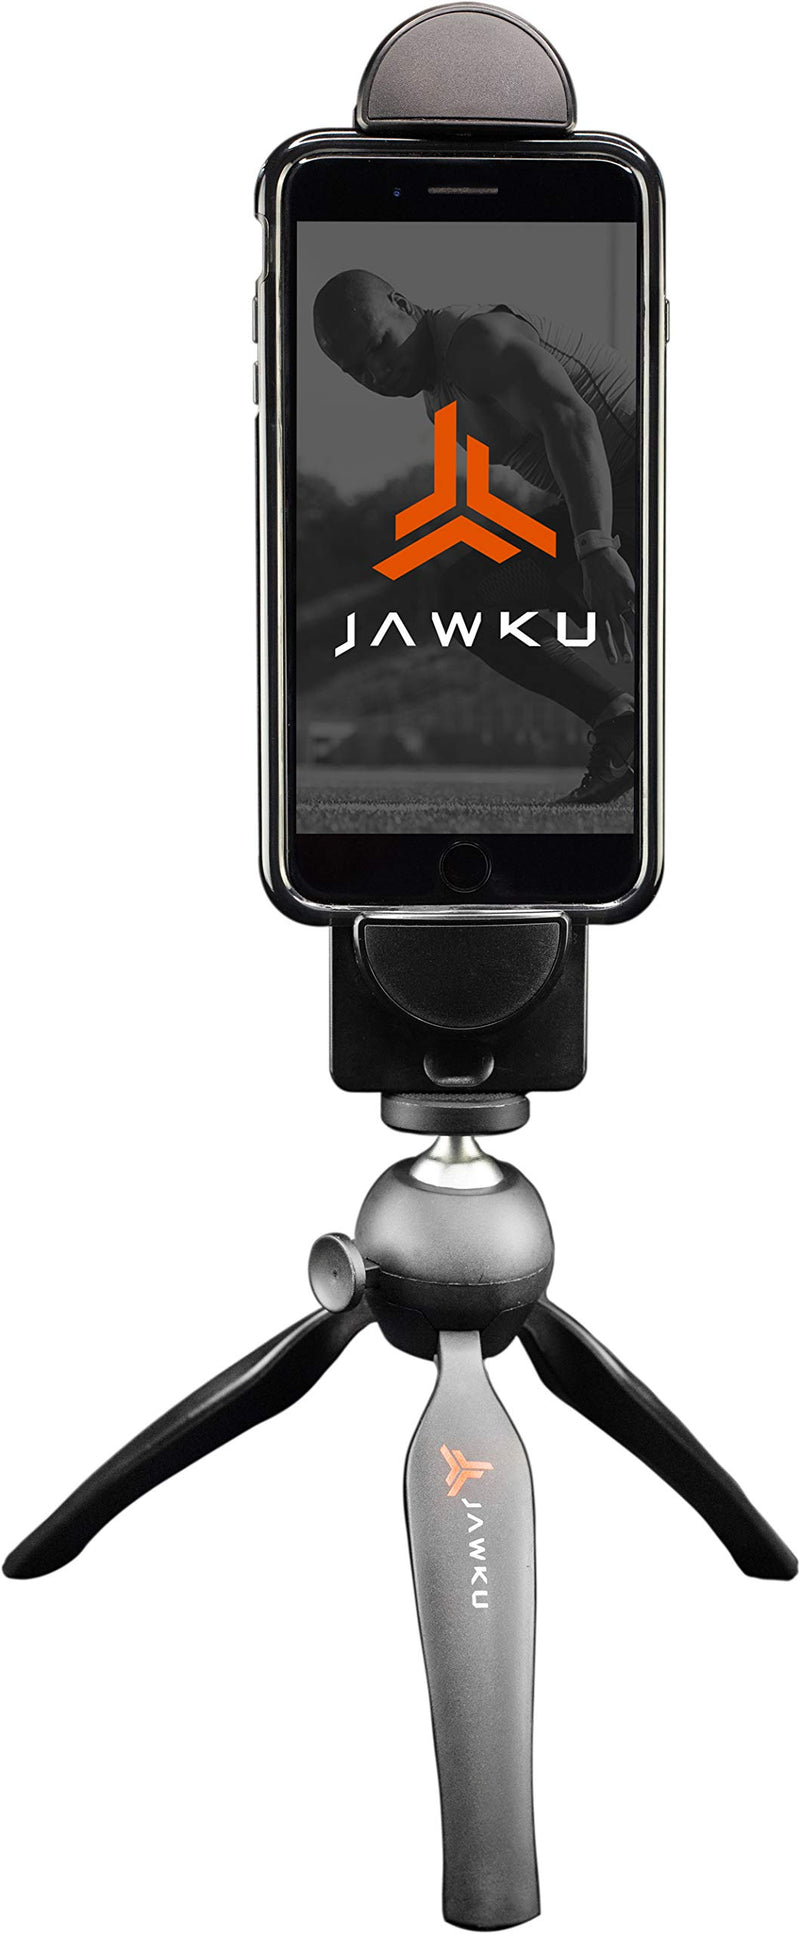 JAWKU Pro Compact Tripod Stand and Mount for Tablets and Smartphones, Compatible with iPad, iPhone, Android, Samsung Galaxy, and Most Other Brands of Cell Phones and Tablets